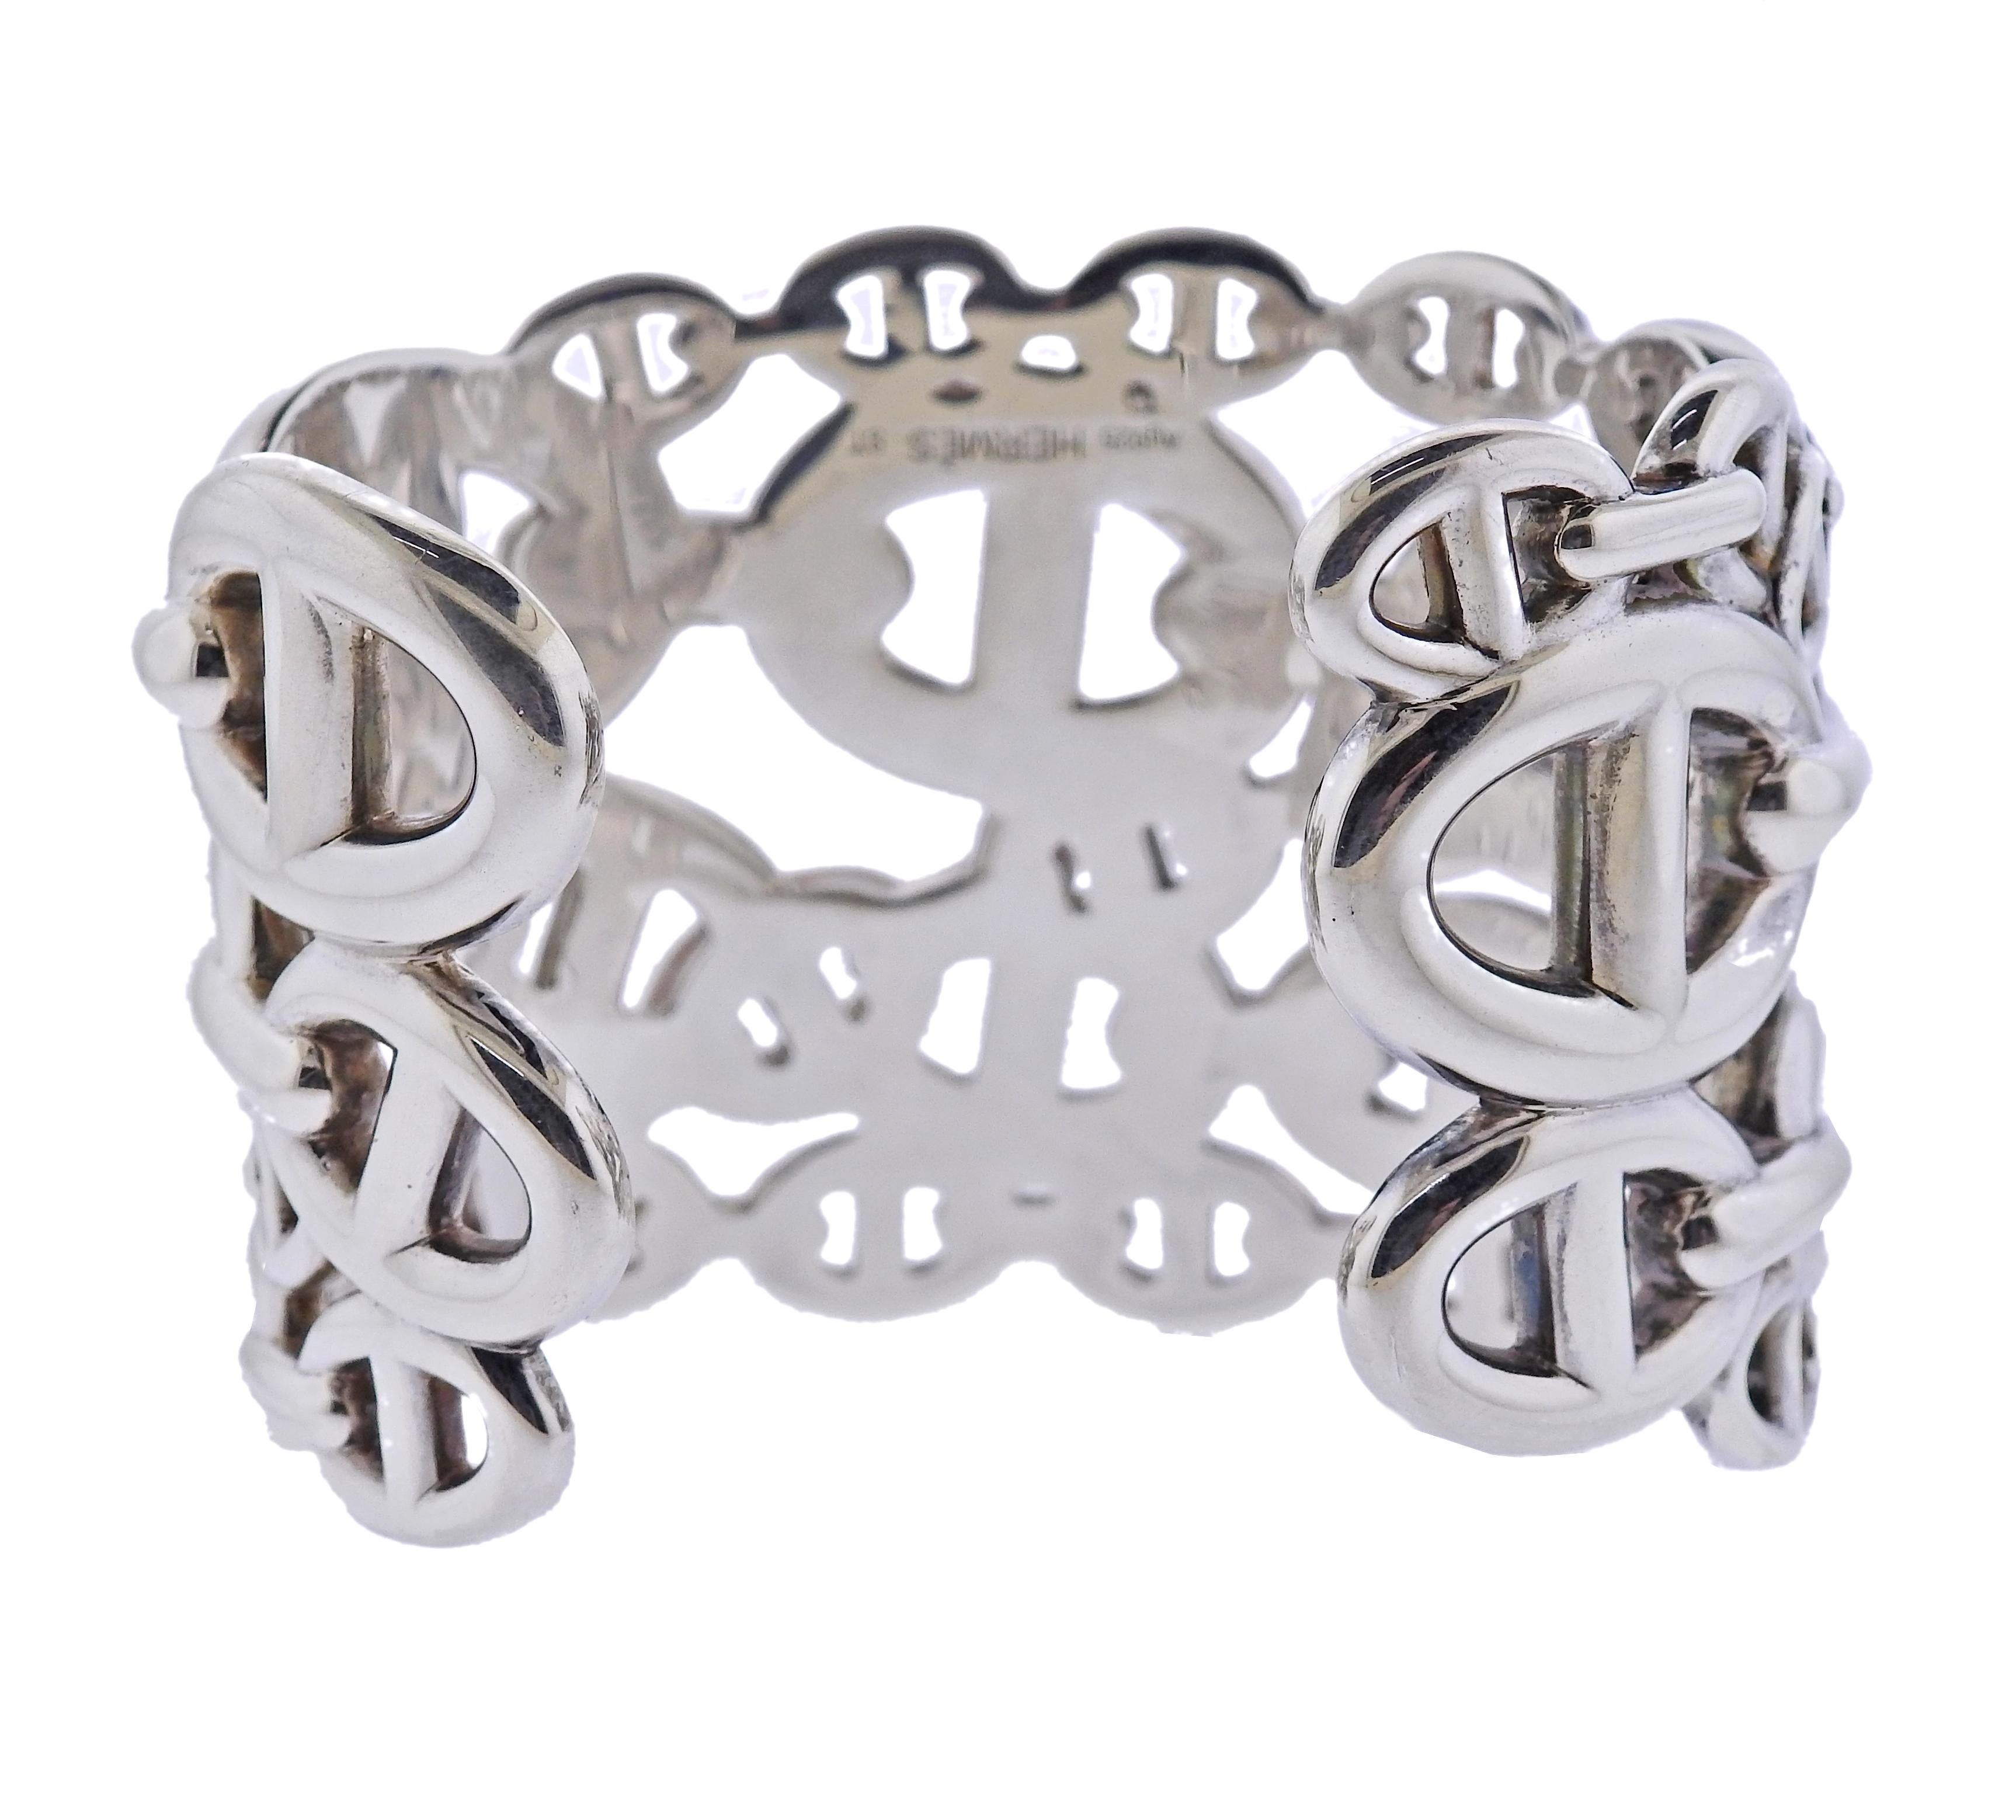 Hermes Chaine D'Ancre Enchainee sterling silver cuff bracelet. Bracelet will fit approx. 7